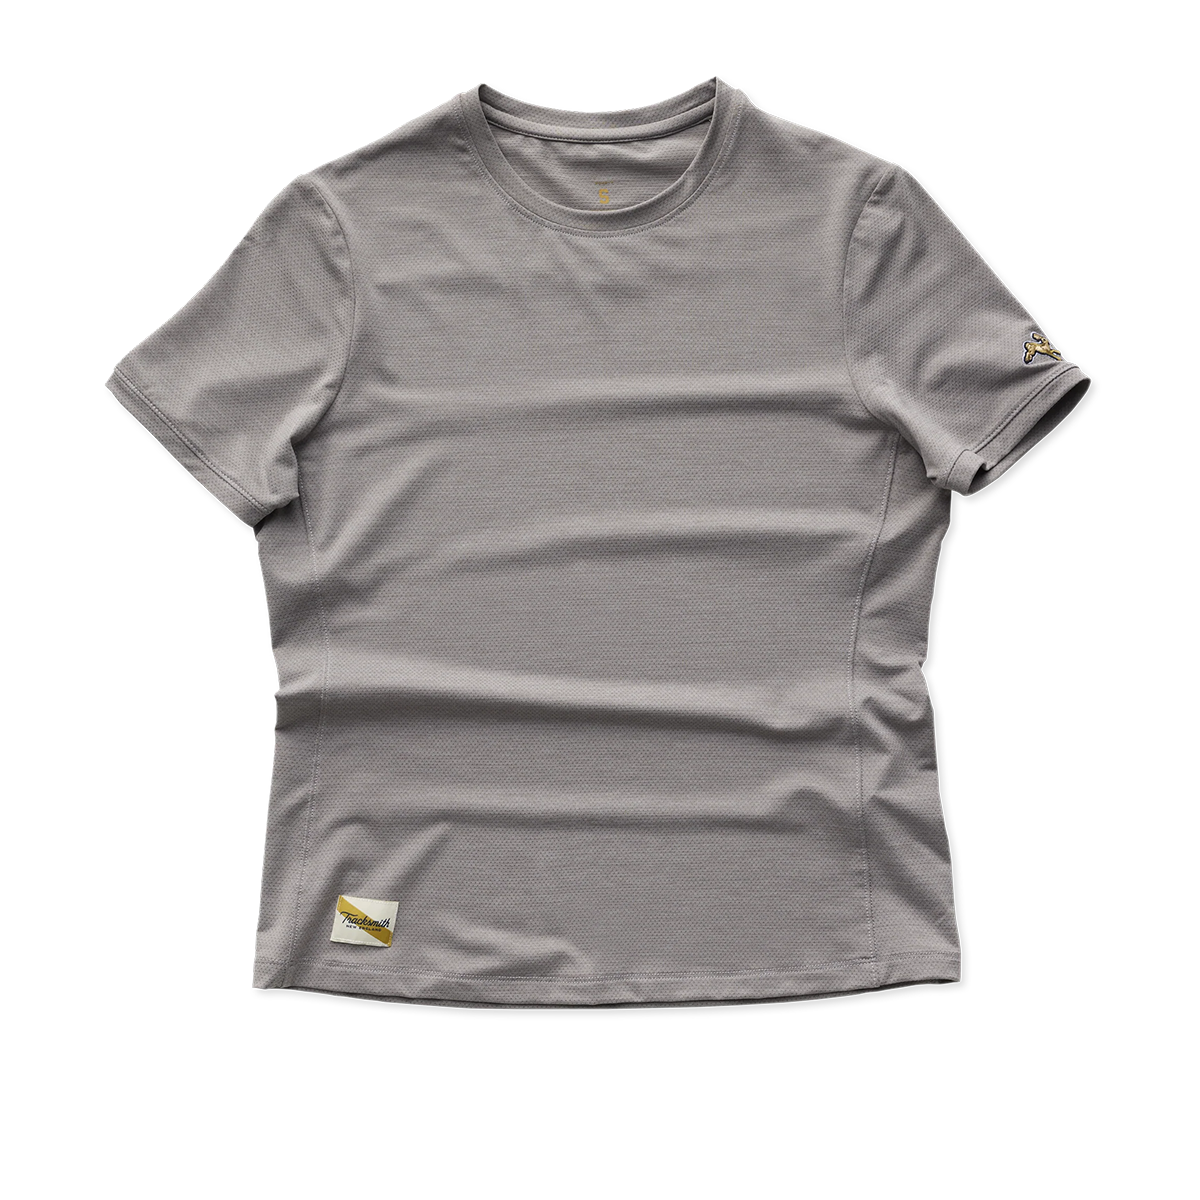 Session Tee - Frost Grey Women